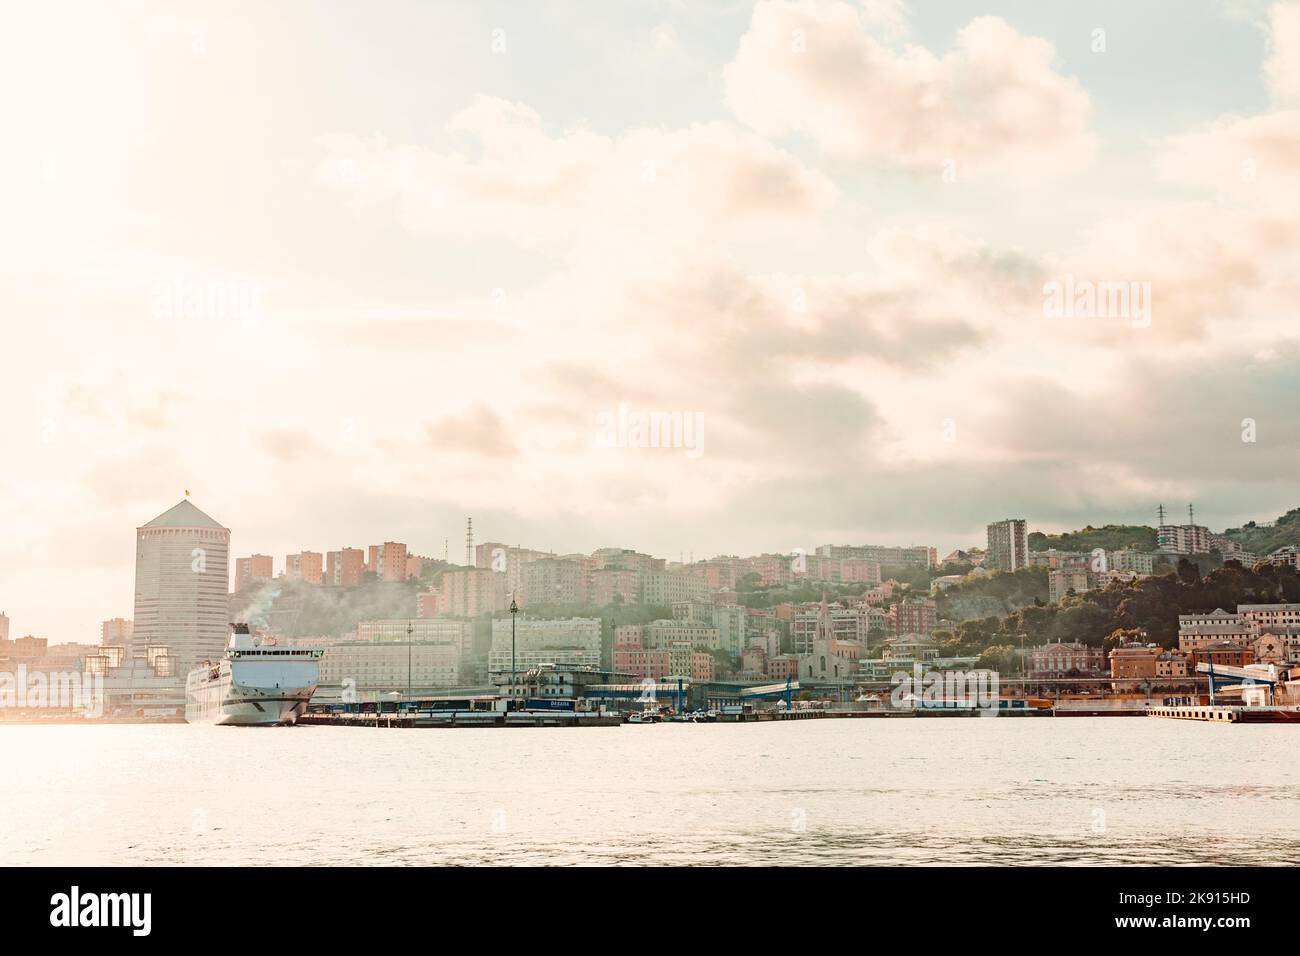 A superb view of the commercial port of Genoa, Liguria region, Italy Stock Photo